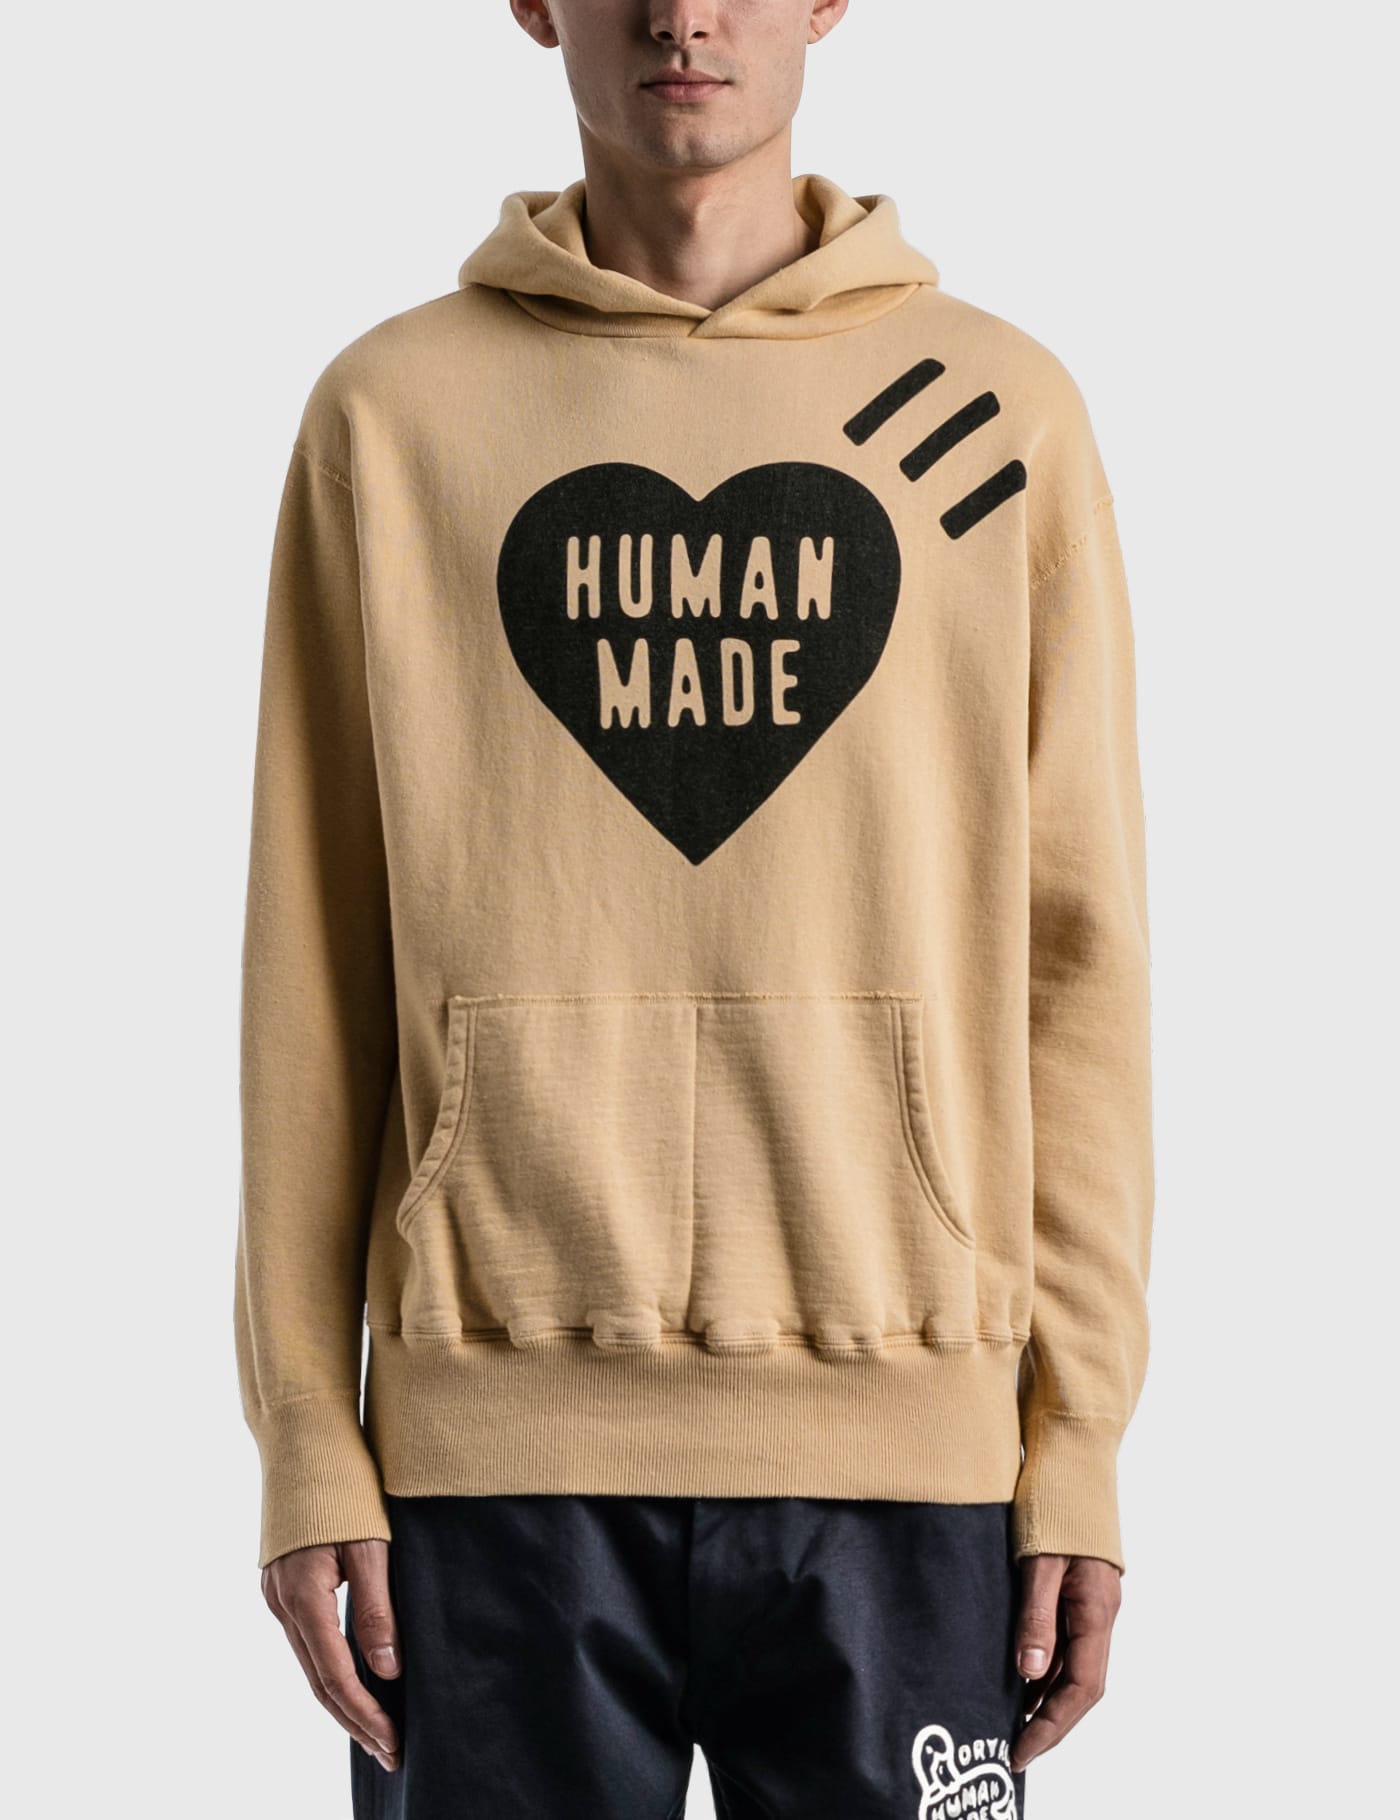 Human Made - Heart Hoodie | HBX - Globally Curated Fashion and 